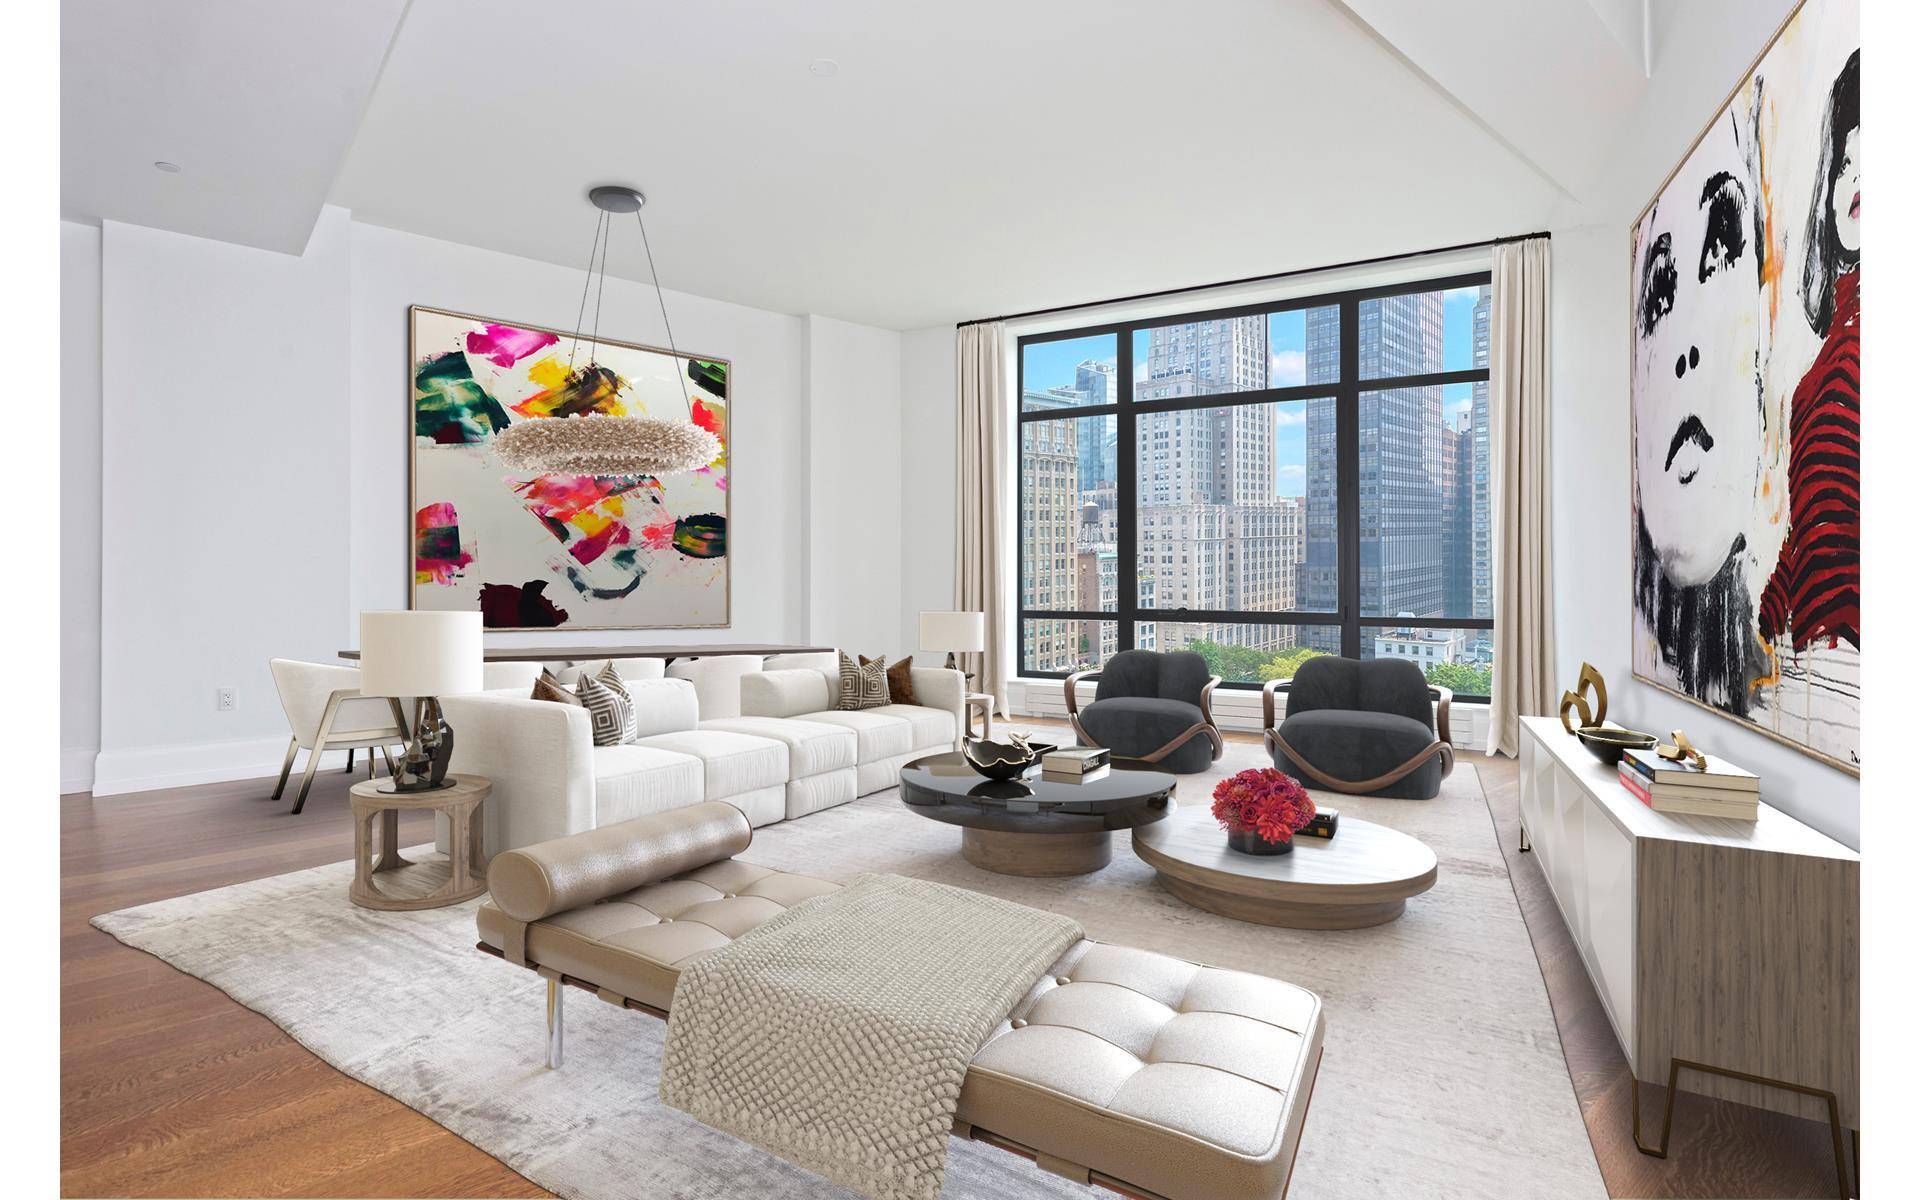 Stunning 4 bedroom, 4. 5 bath home with Park Views, located in the coveted 10 Madison Square West Condominium.